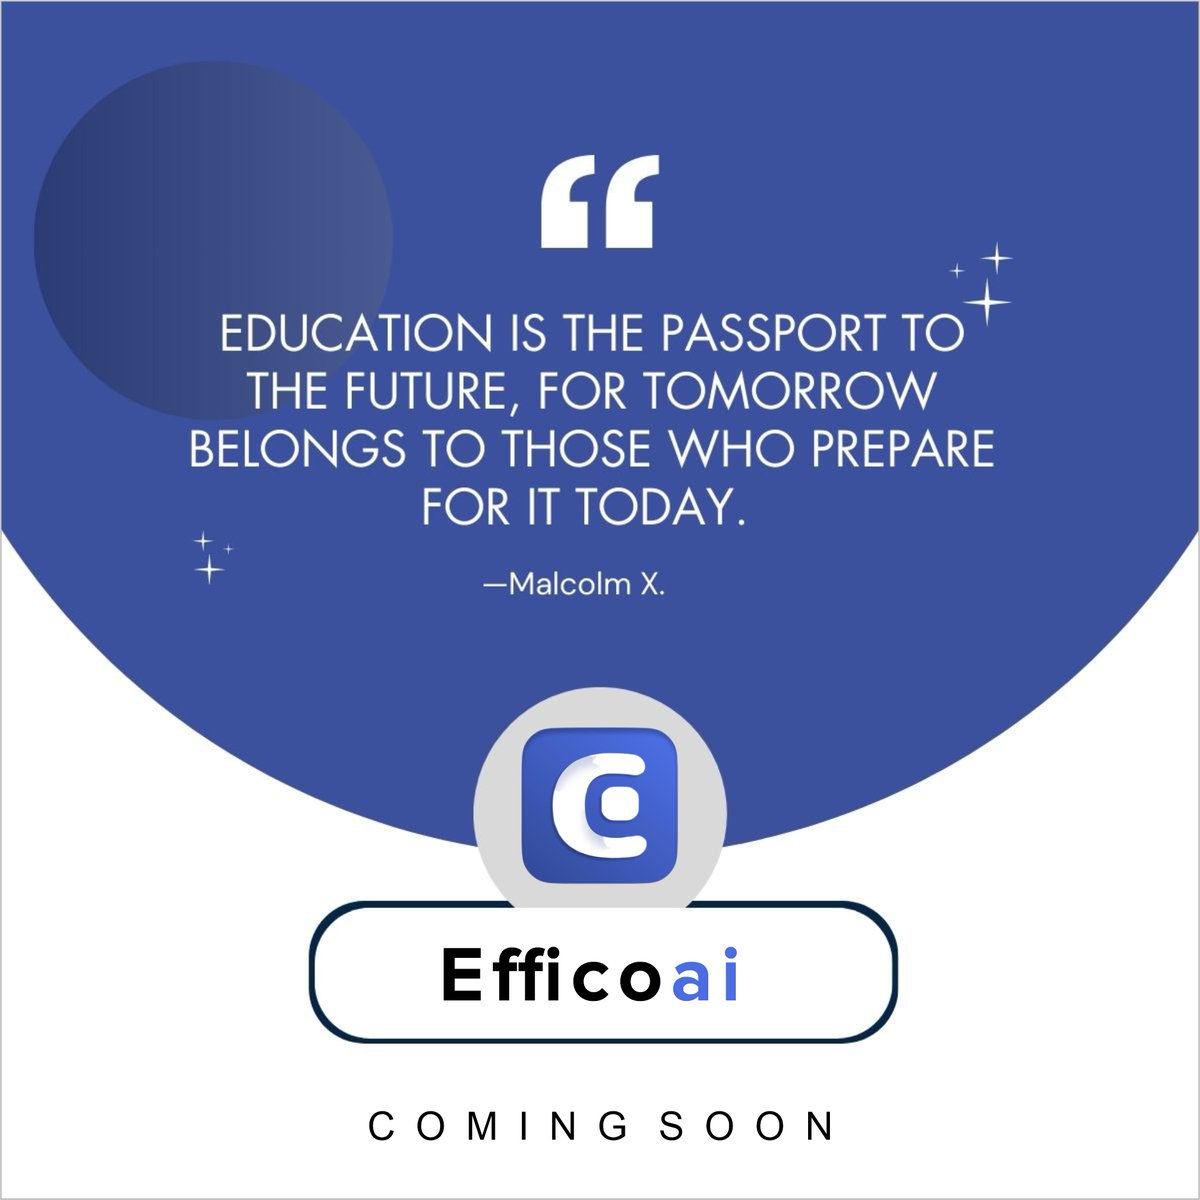 Attention, university students! Are you ready to take your learning to the next level? Effico is coming soon to revolutionize the way you study. Connect with us on LinkedIn and be part of the future of education! #EfficoAI #HigherEducation

#EfficoRevolution
#NextLevelLearning